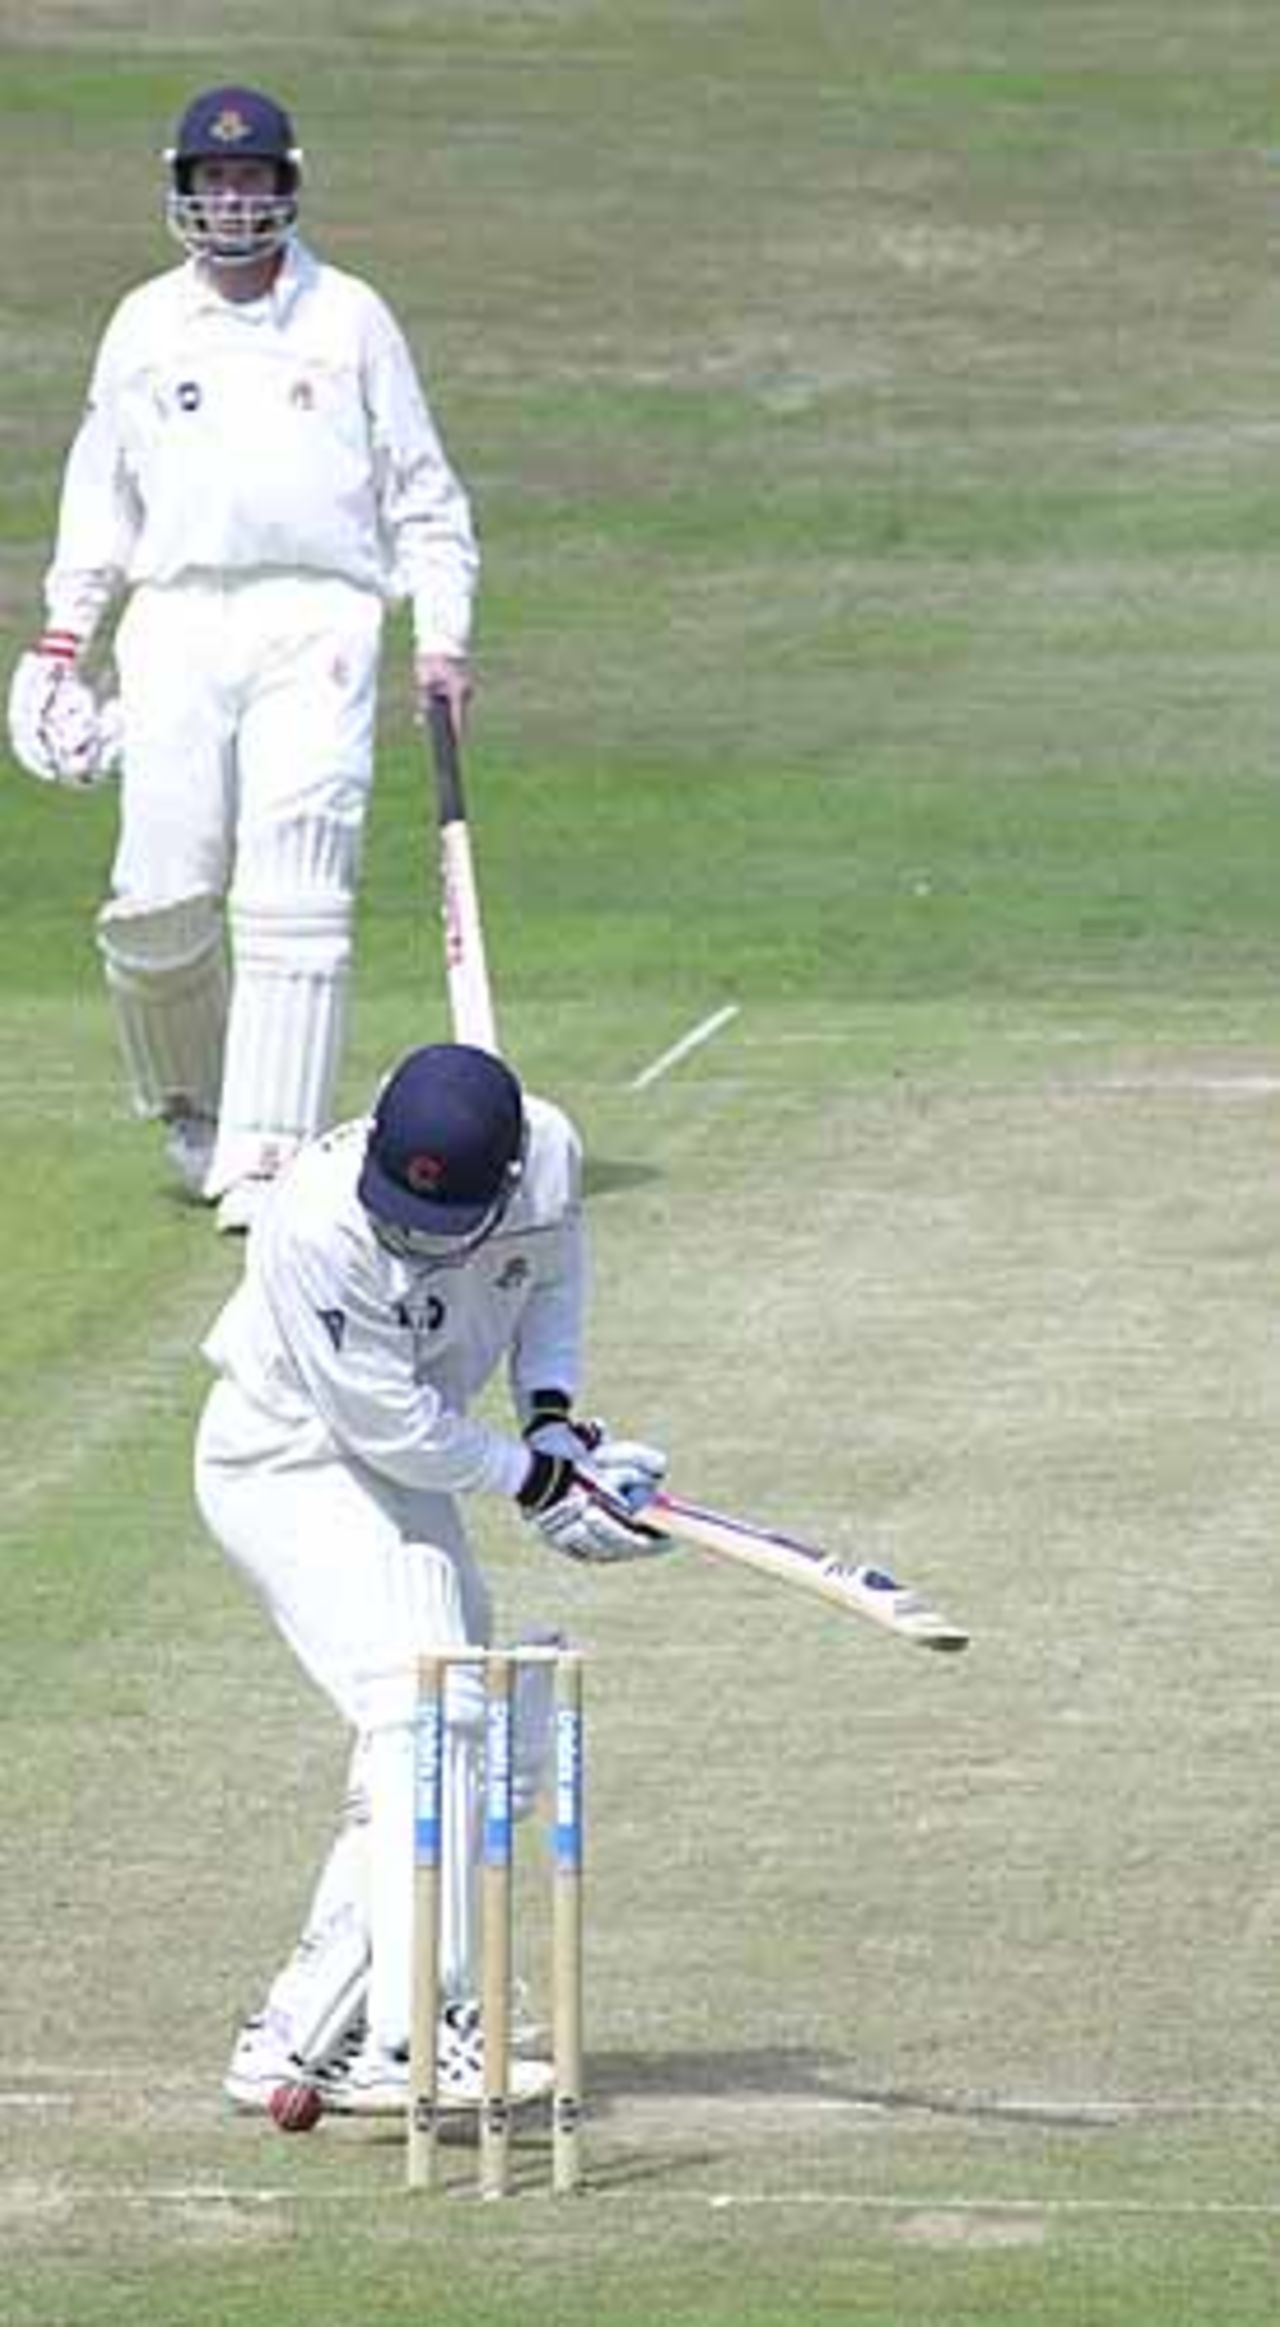 Joe Scuderi has lost this ball from Gough under his feet and is kicking it away from the stumps, CricInfo Championship, 27th July 2001, Leeds